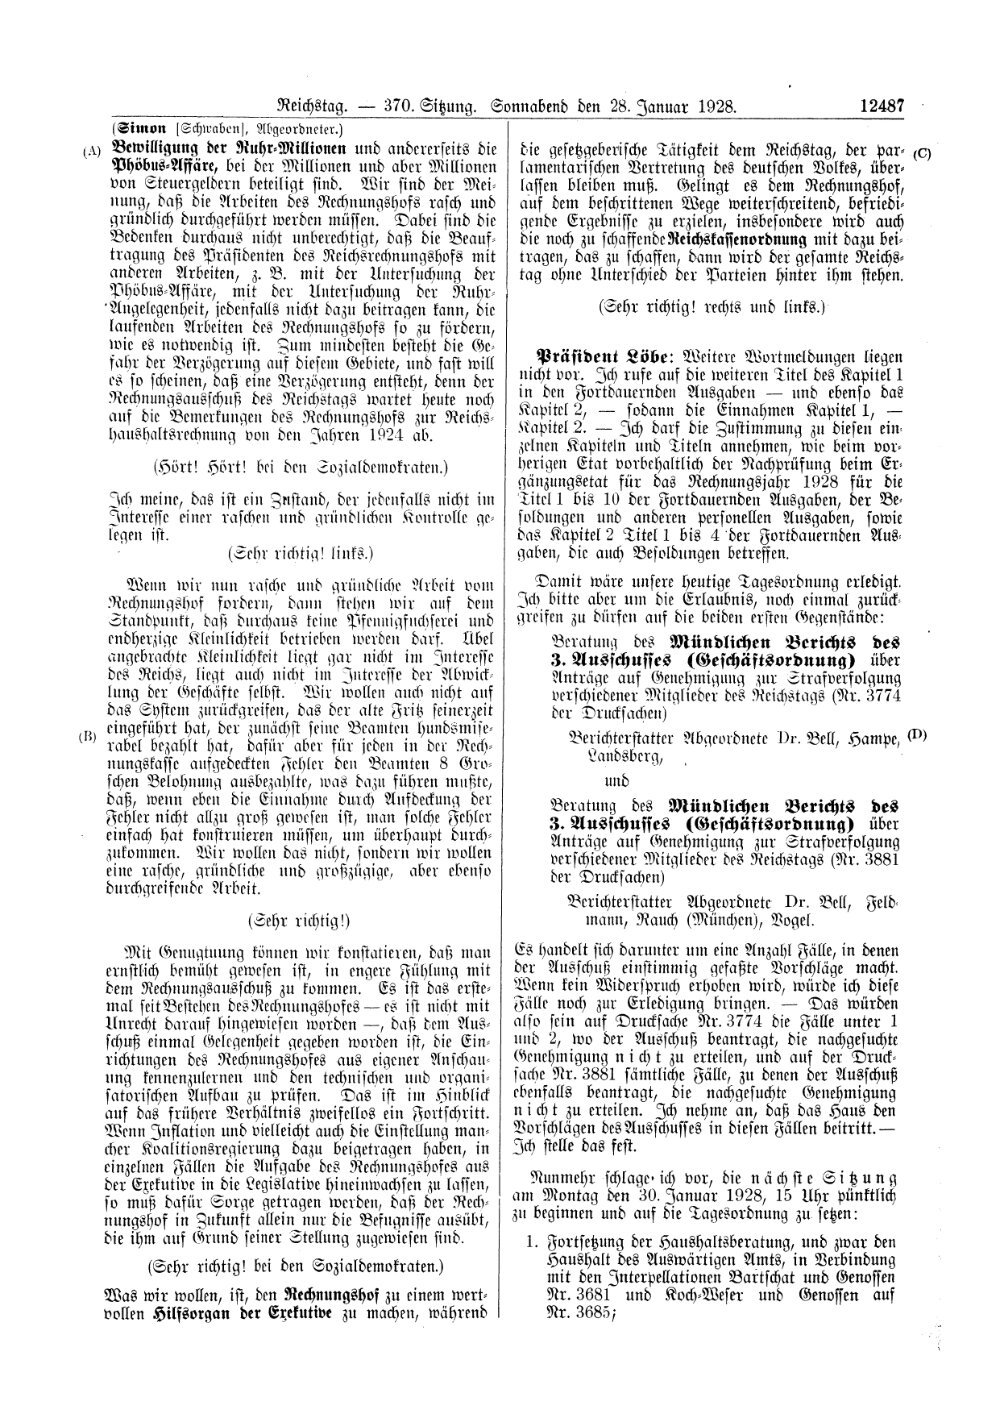 Scan of page 12487